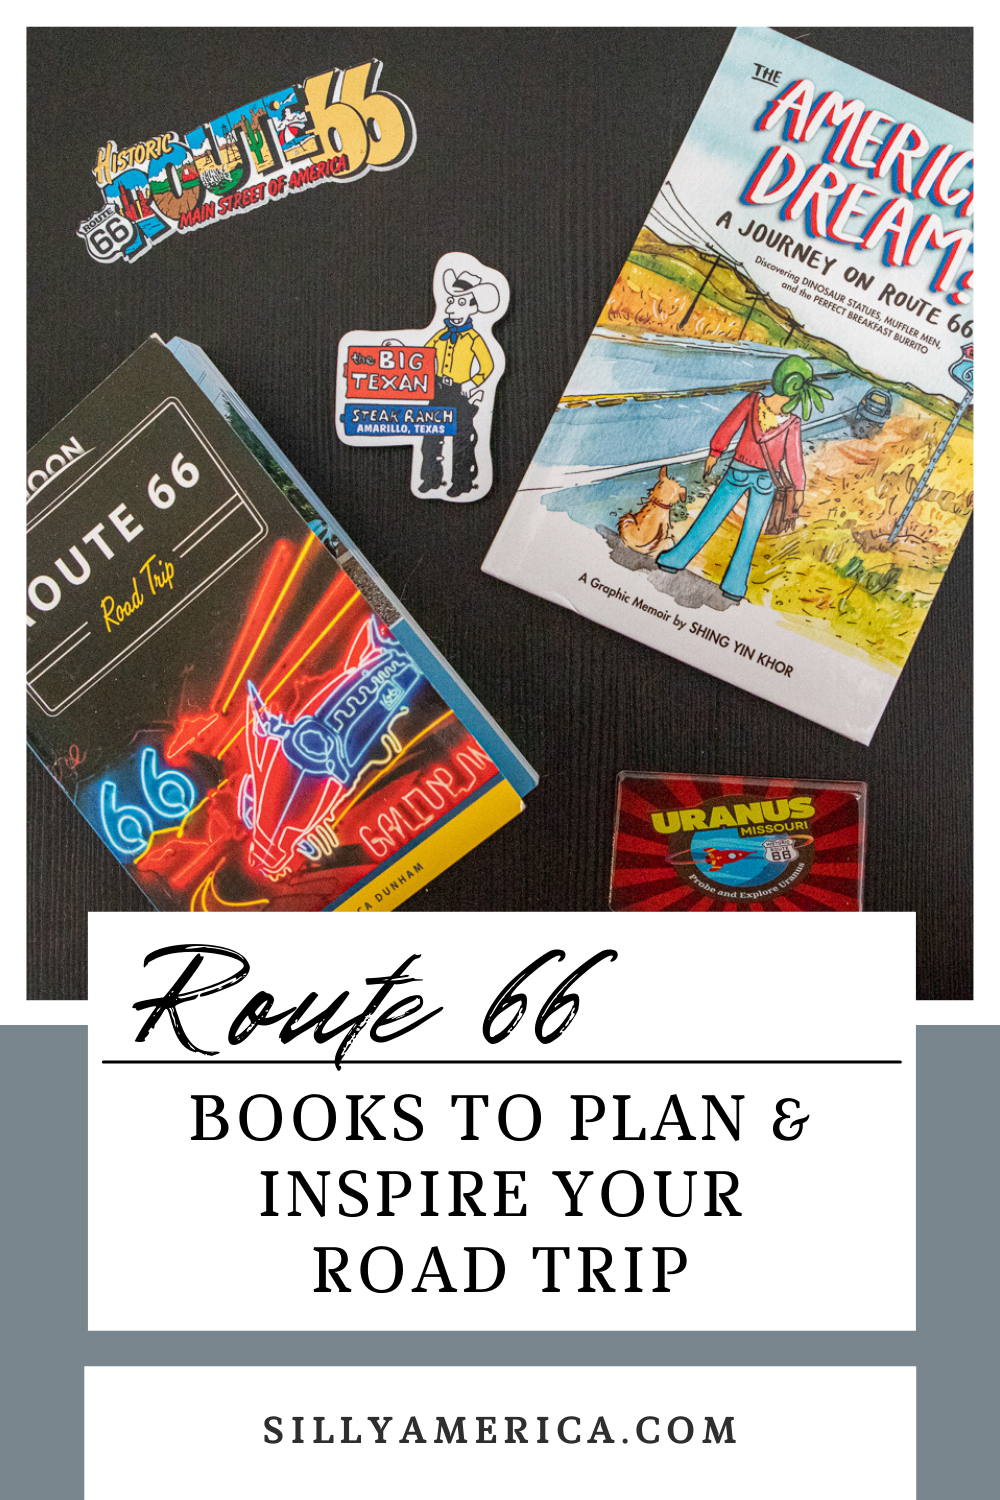 If you're planning a Route 66 road trip and are looking for a guidebook to help determine your stops, books to entertain your kids, books that will inspire and inform, or books that will entertain you, check out these must-read Route 66 Books. #Route66 #travel #RoadTrip #Route66RoadTrip #Guidebook #Books